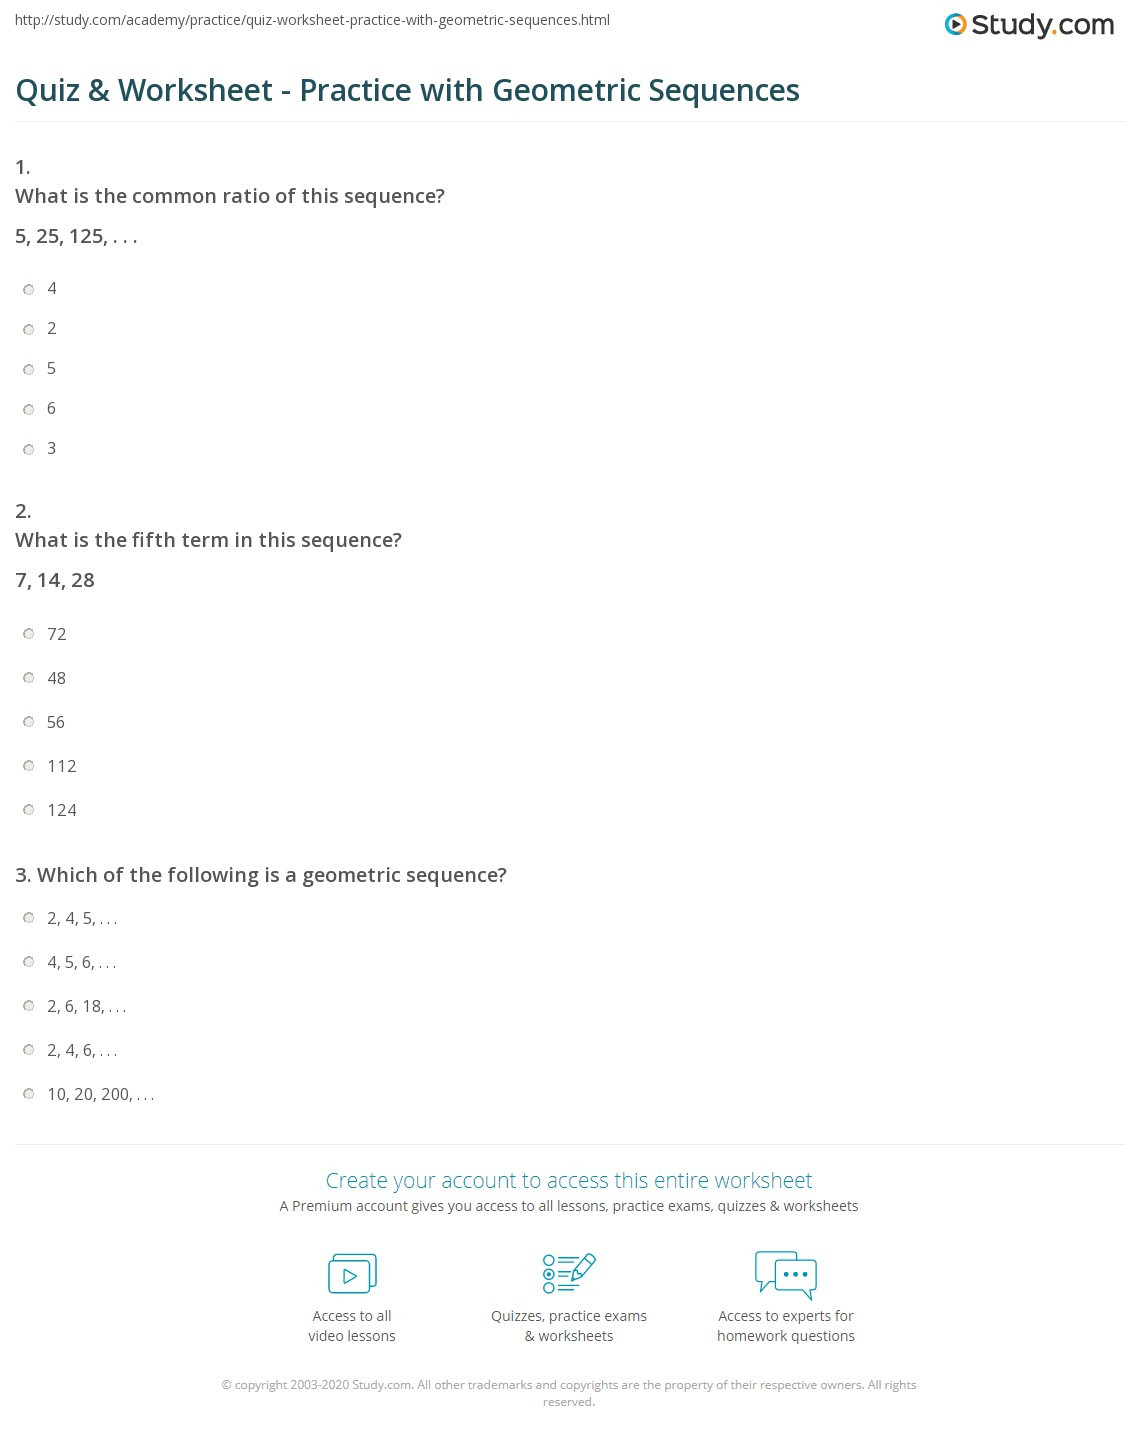 Geometric and Arithmetic Sequence Worksheet Quiz &amp; Worksheet Practice with Geometric Sequences